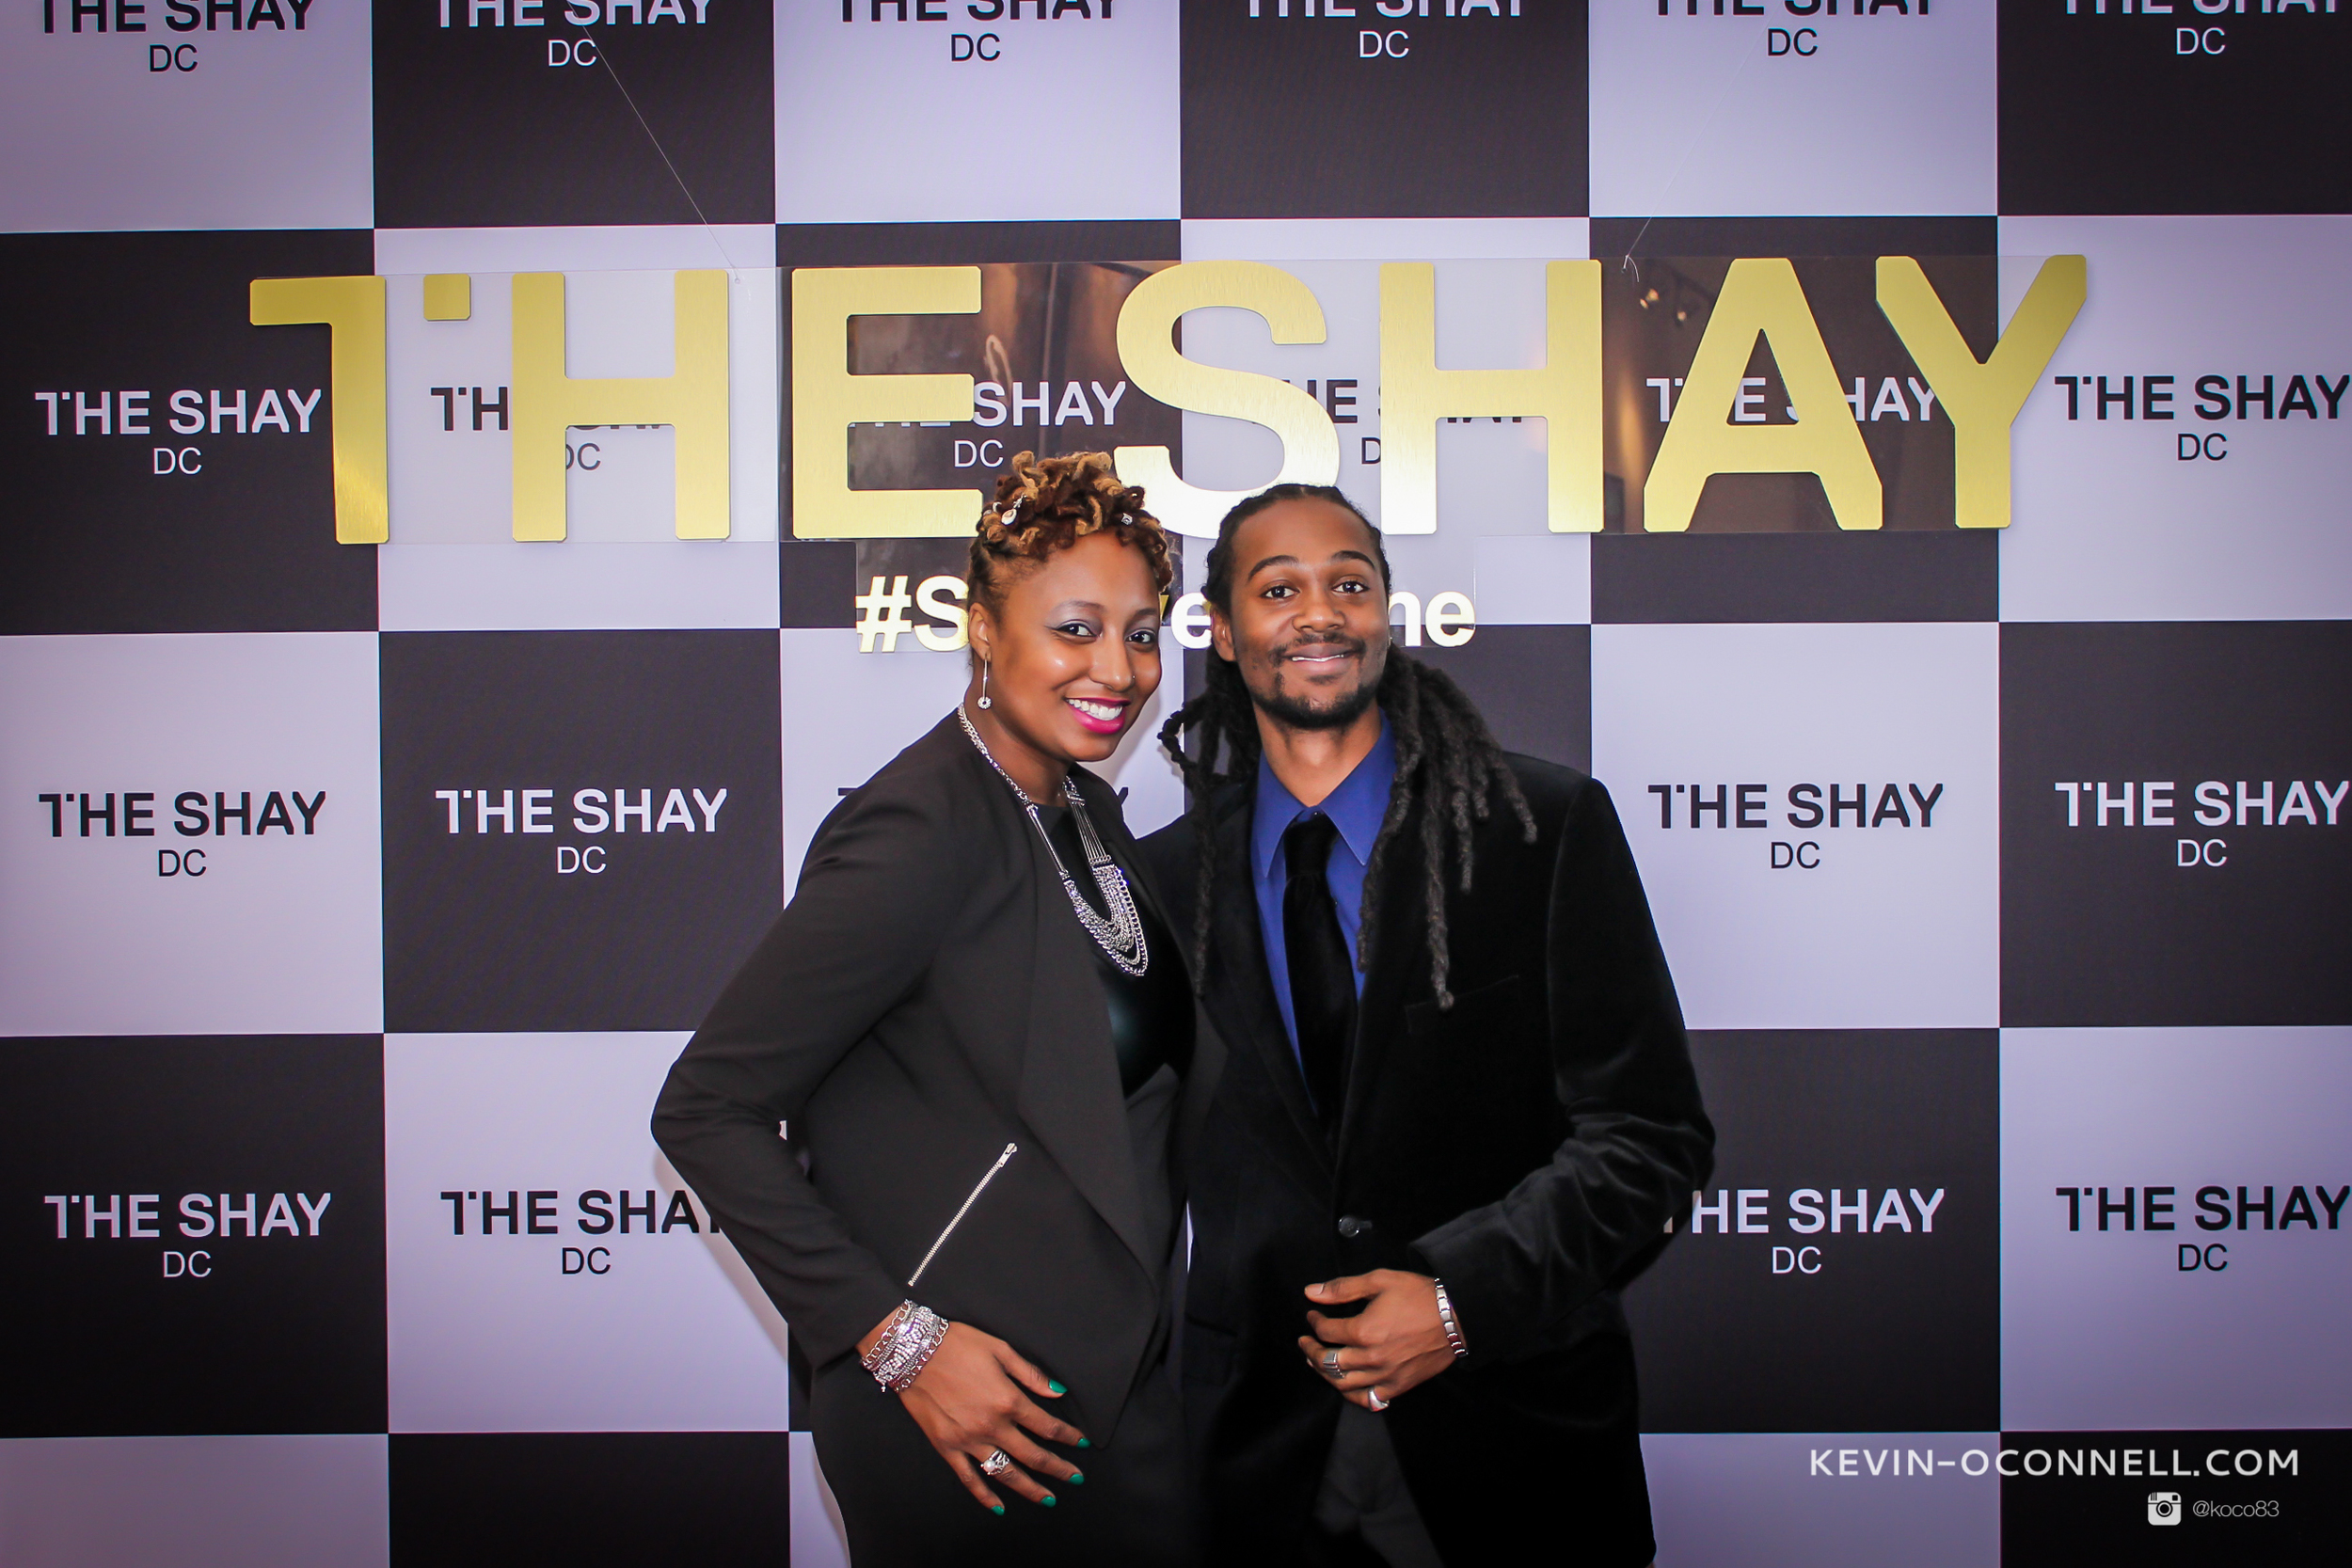 TheShay.teasers.KOConnell.10.1.15 (2 of 8).jpg